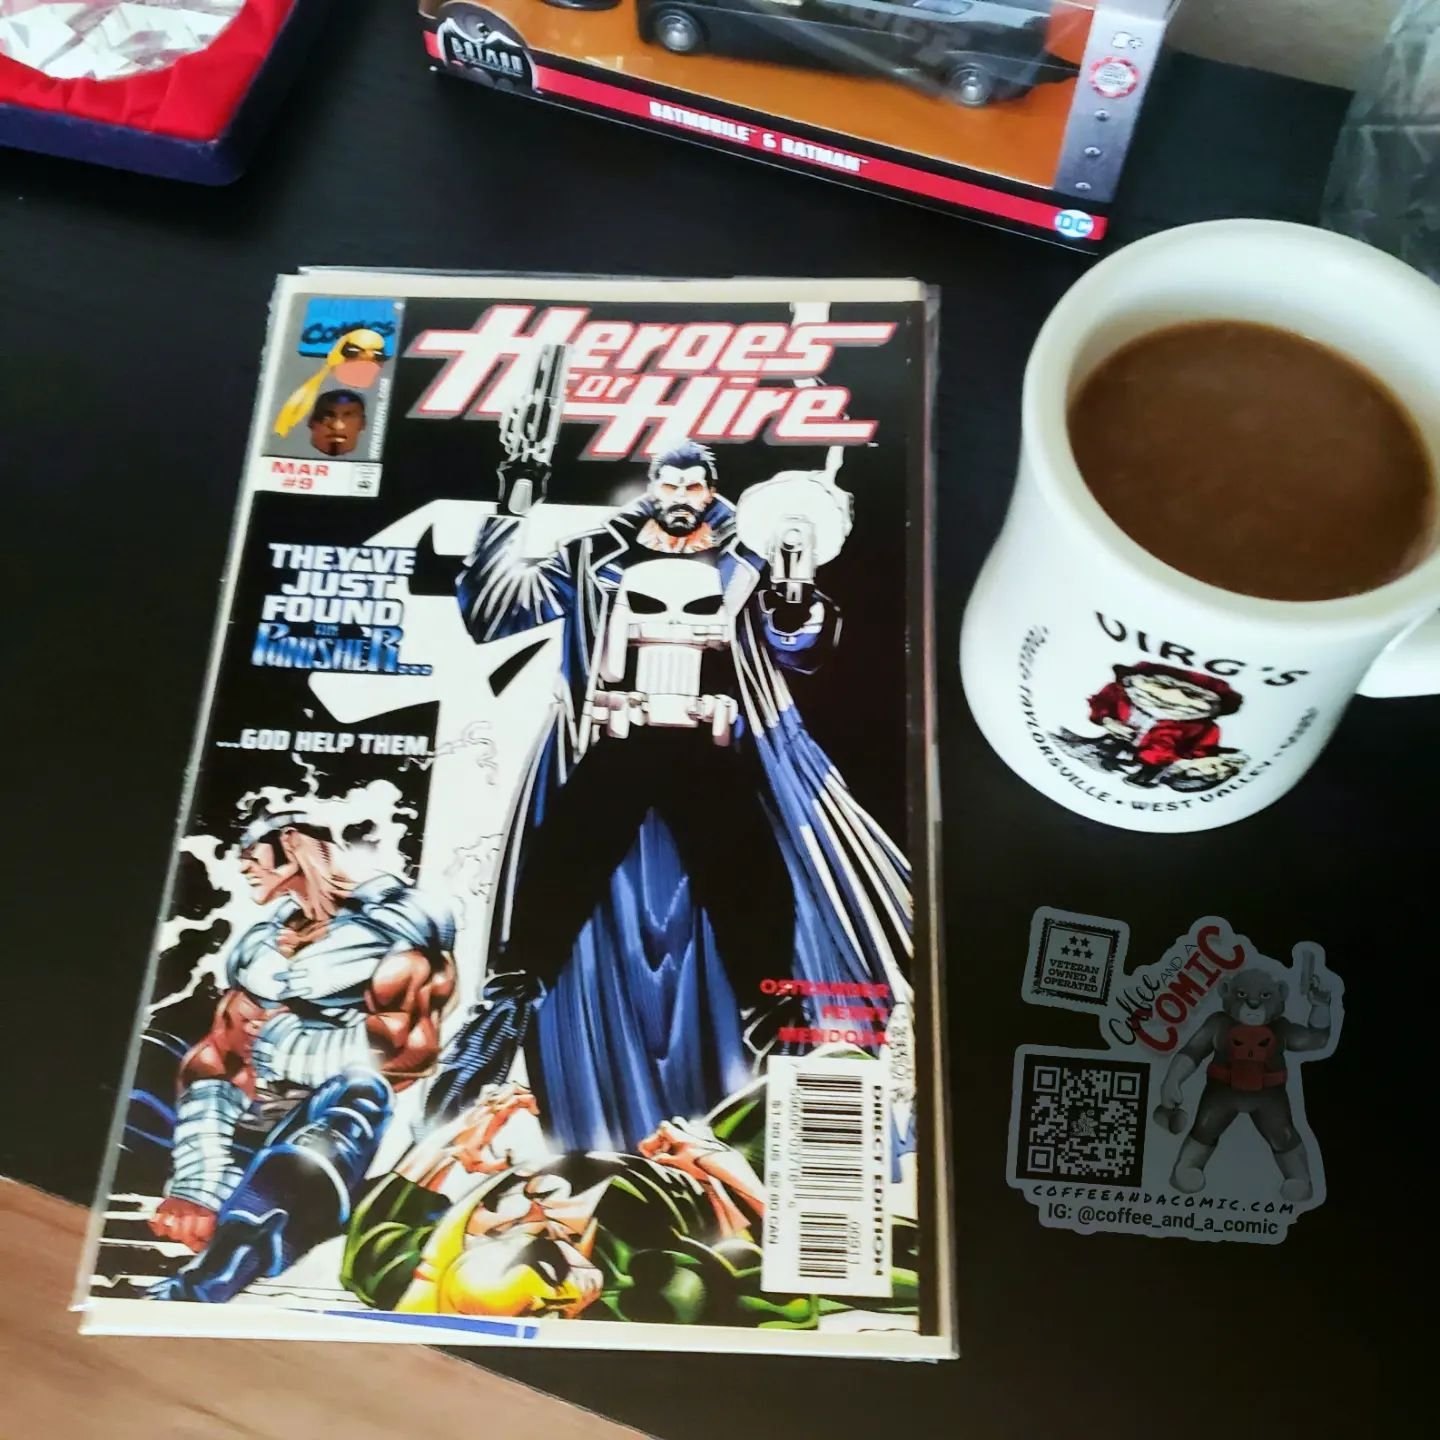 Today's coffee ☕ and a comic 📓 is In the gritty world of vigilante justice, alliances are forged and broken amidst the chaos of the streets. &quot;Heroes for Hire #9&quot; thrusts readers into a web of intrigue and conflict, masterfully woven by the